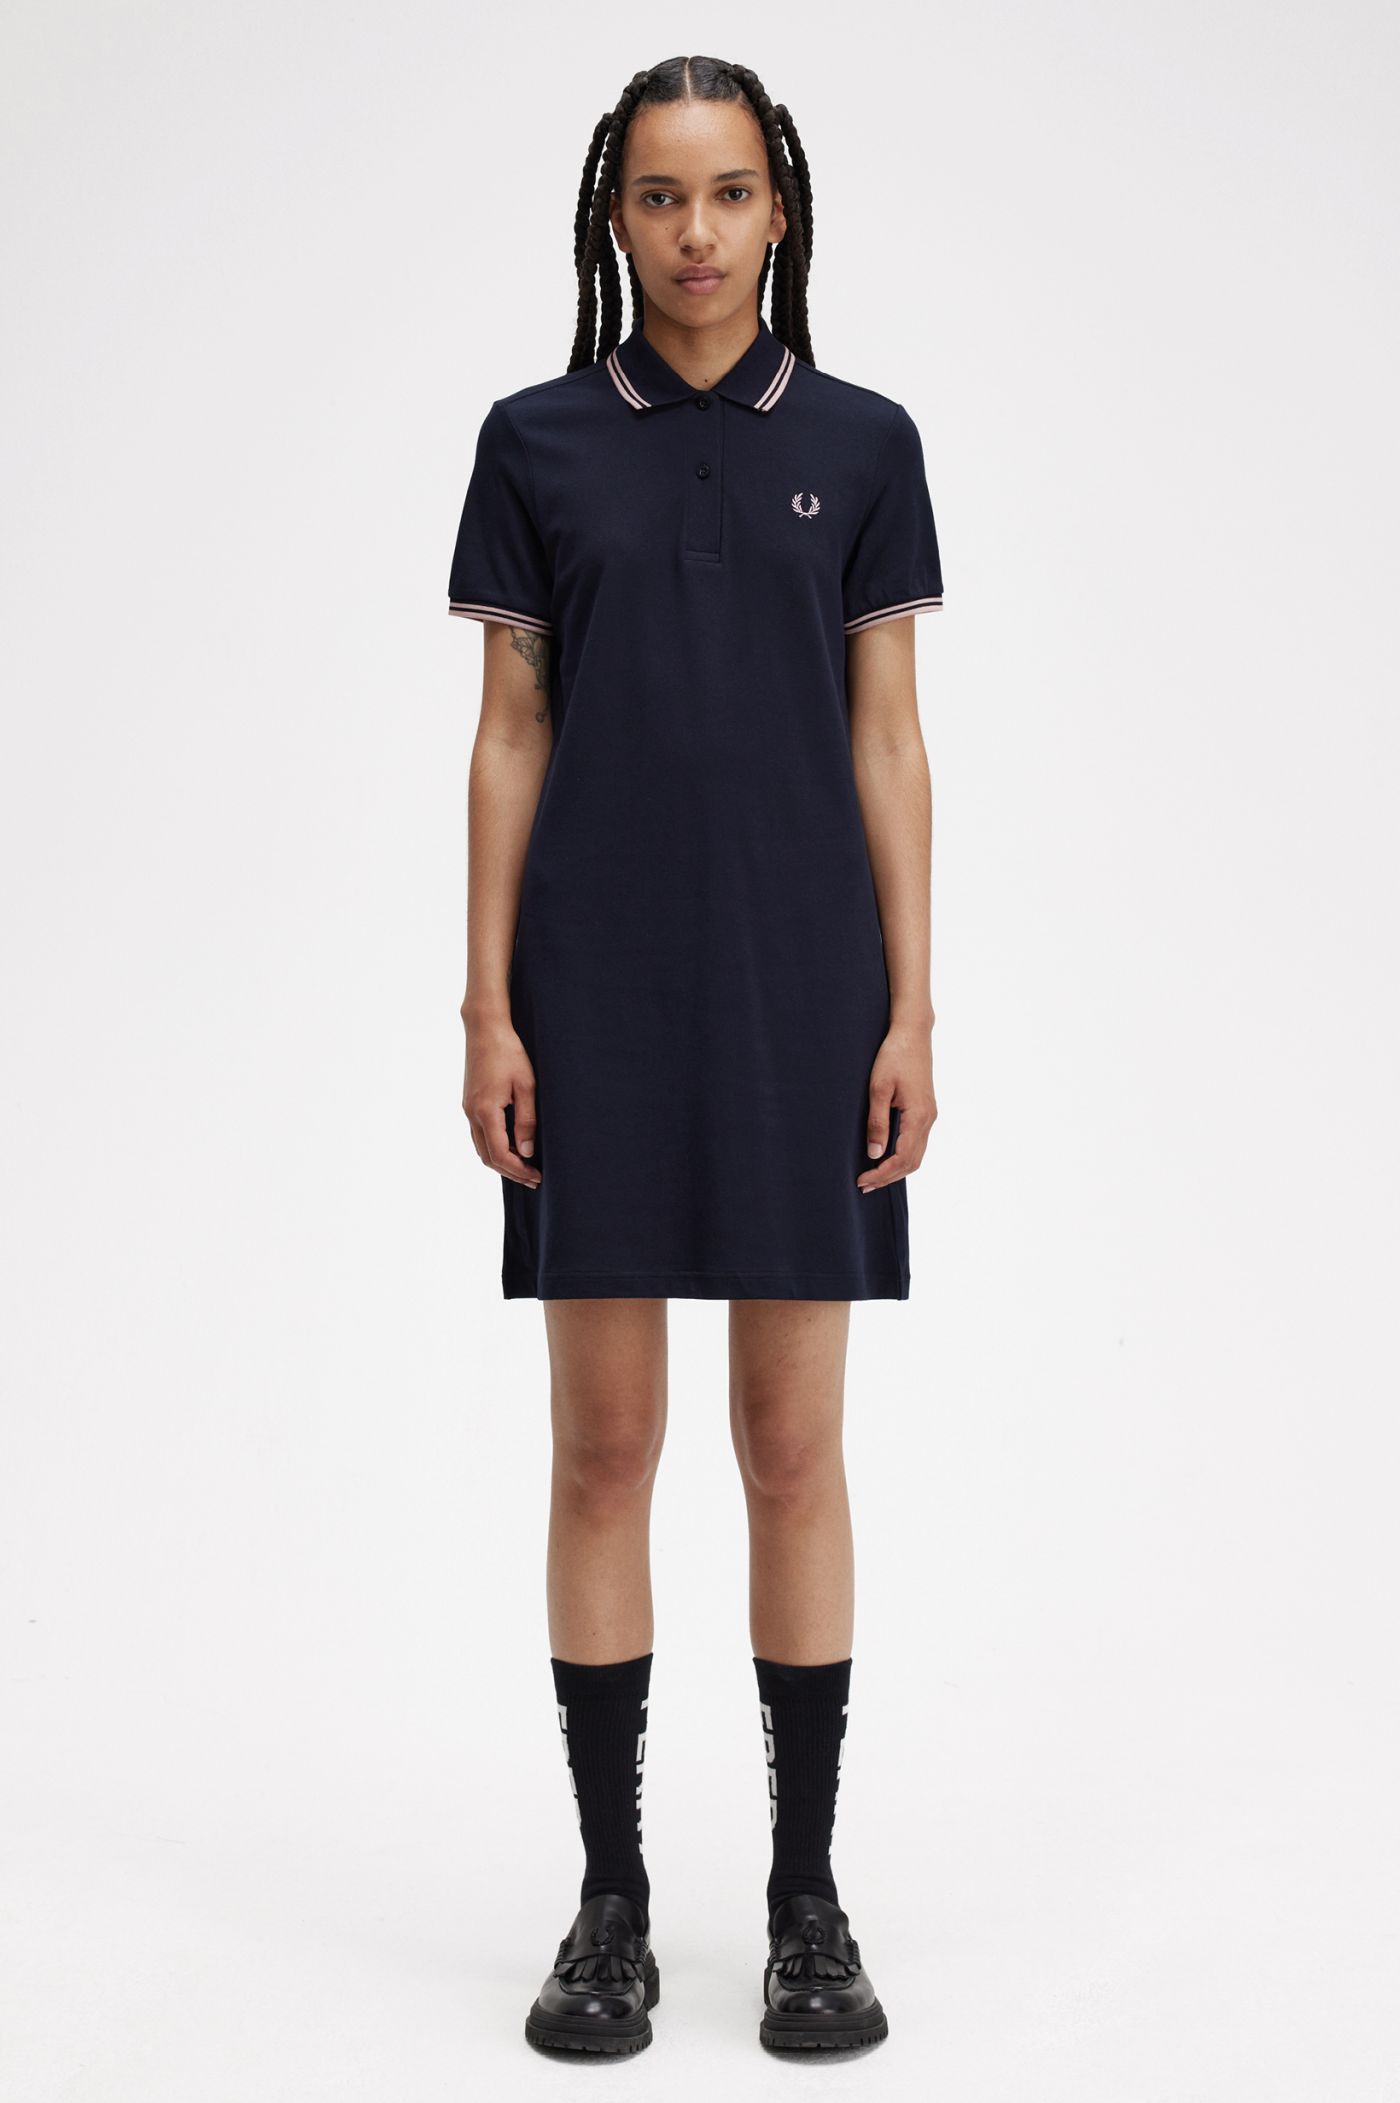 Twin Tipped Fred Perry Shirt Dress Navy Womens Dresses Polo Dresses And Shirt Dresses